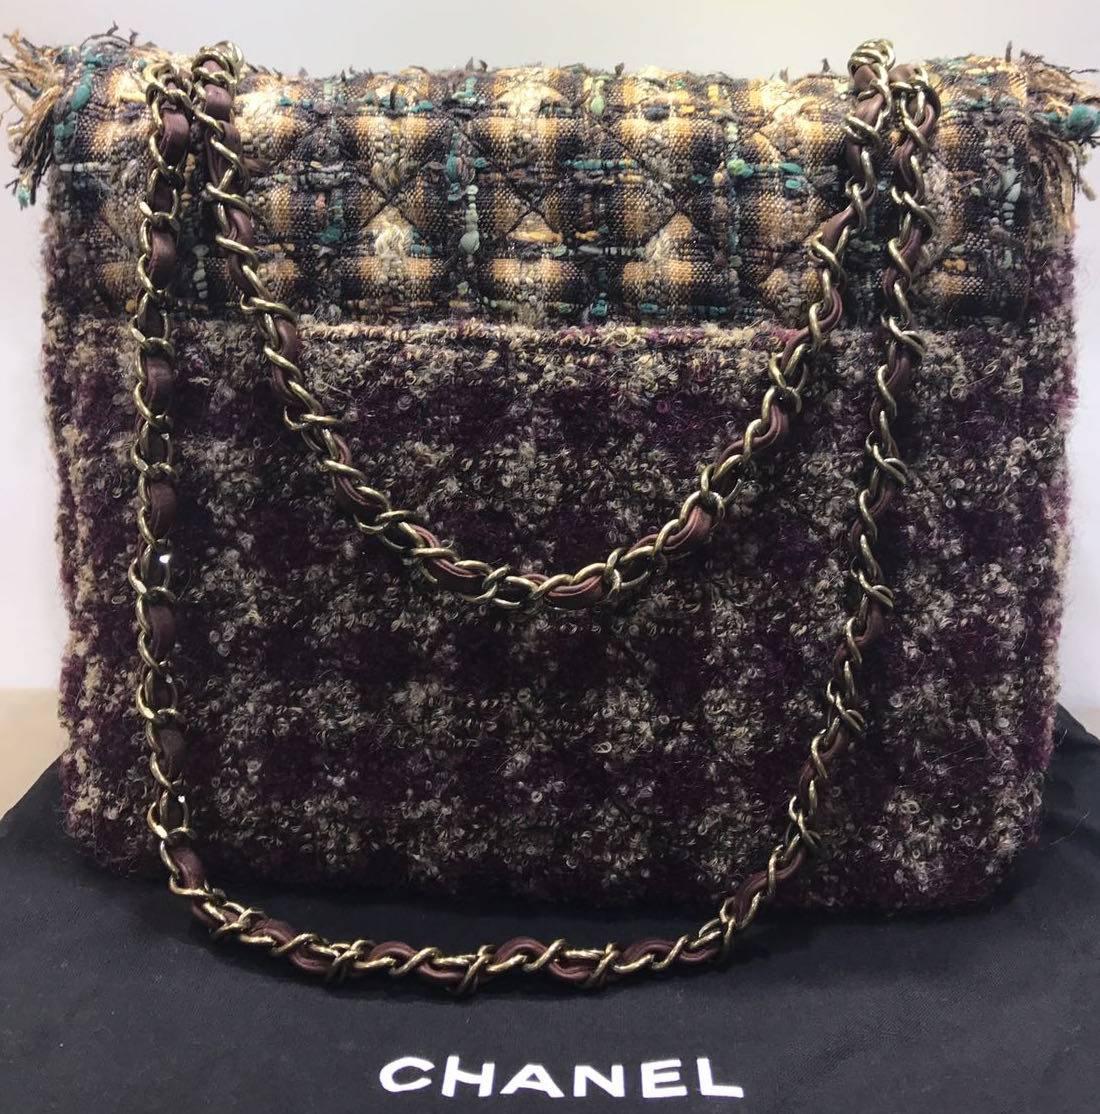 - Chanel multi coloured(yellow, brown, beige, green, red, white and black) tweed flap bag from 2014 collection. This bag is in excellent condition. 

- Featuring brown dark gold chain strap. Dark gold "CC" closing. Maroon satin interior.